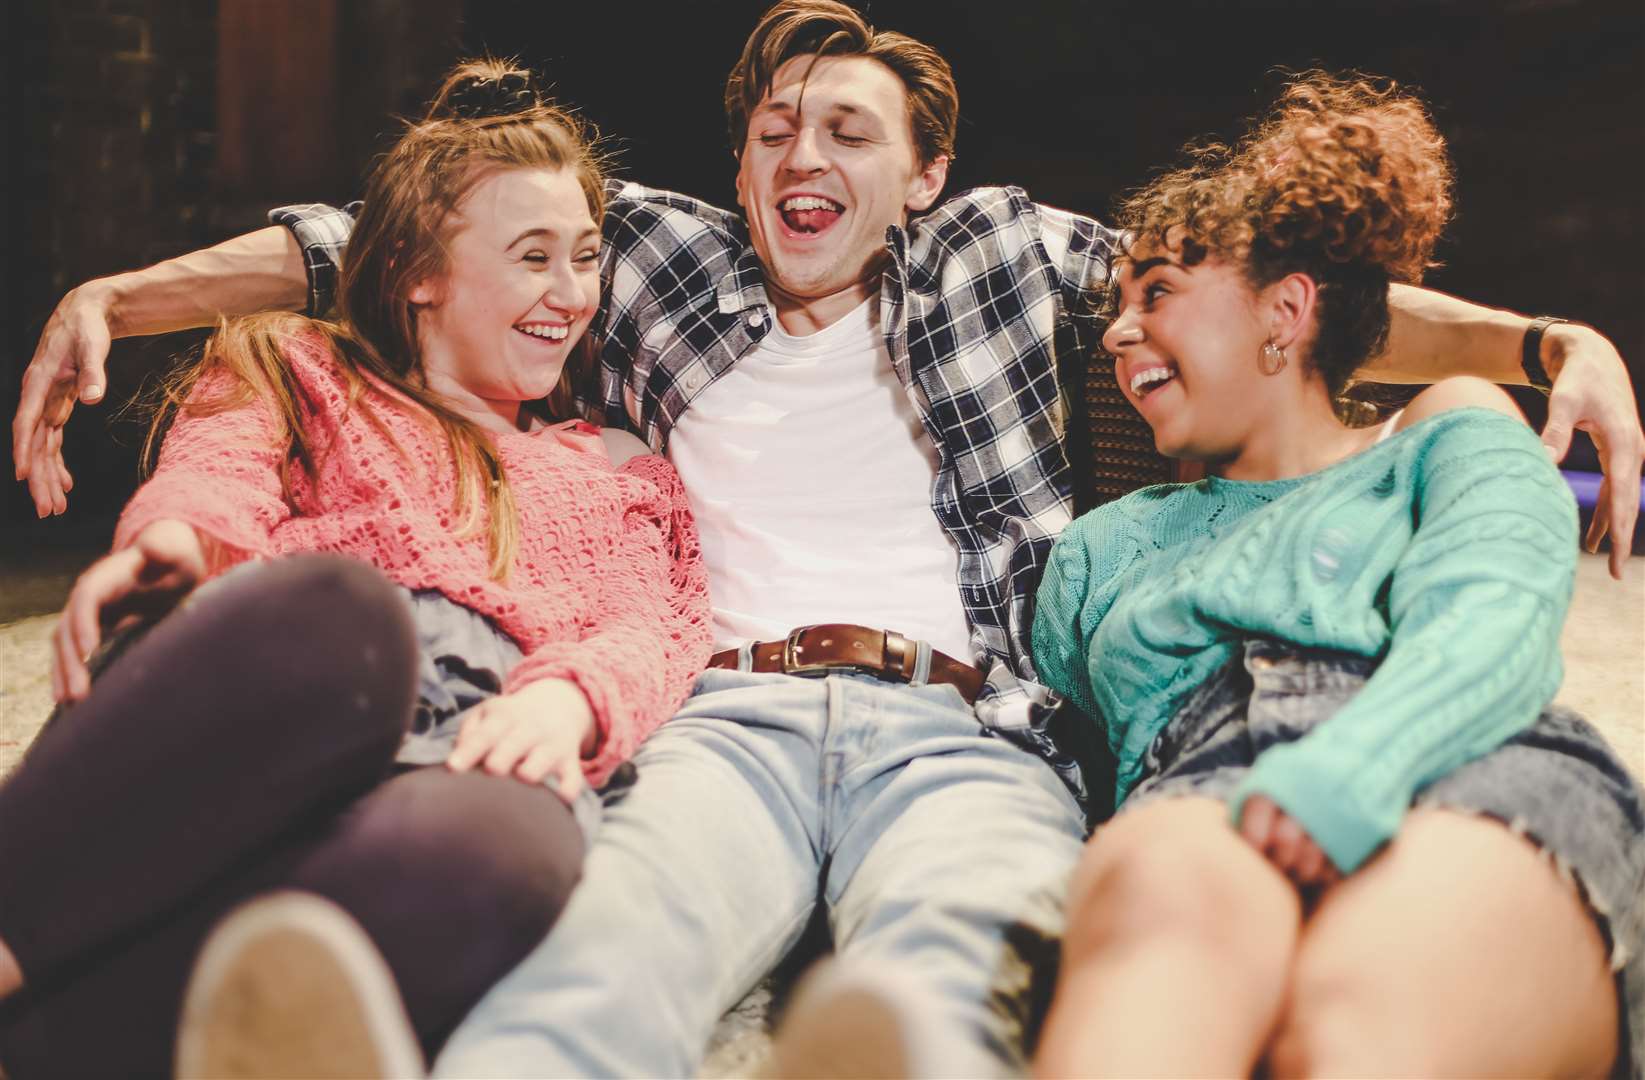 Rita, Sue and Bob Too is at the Marlowe Theatre